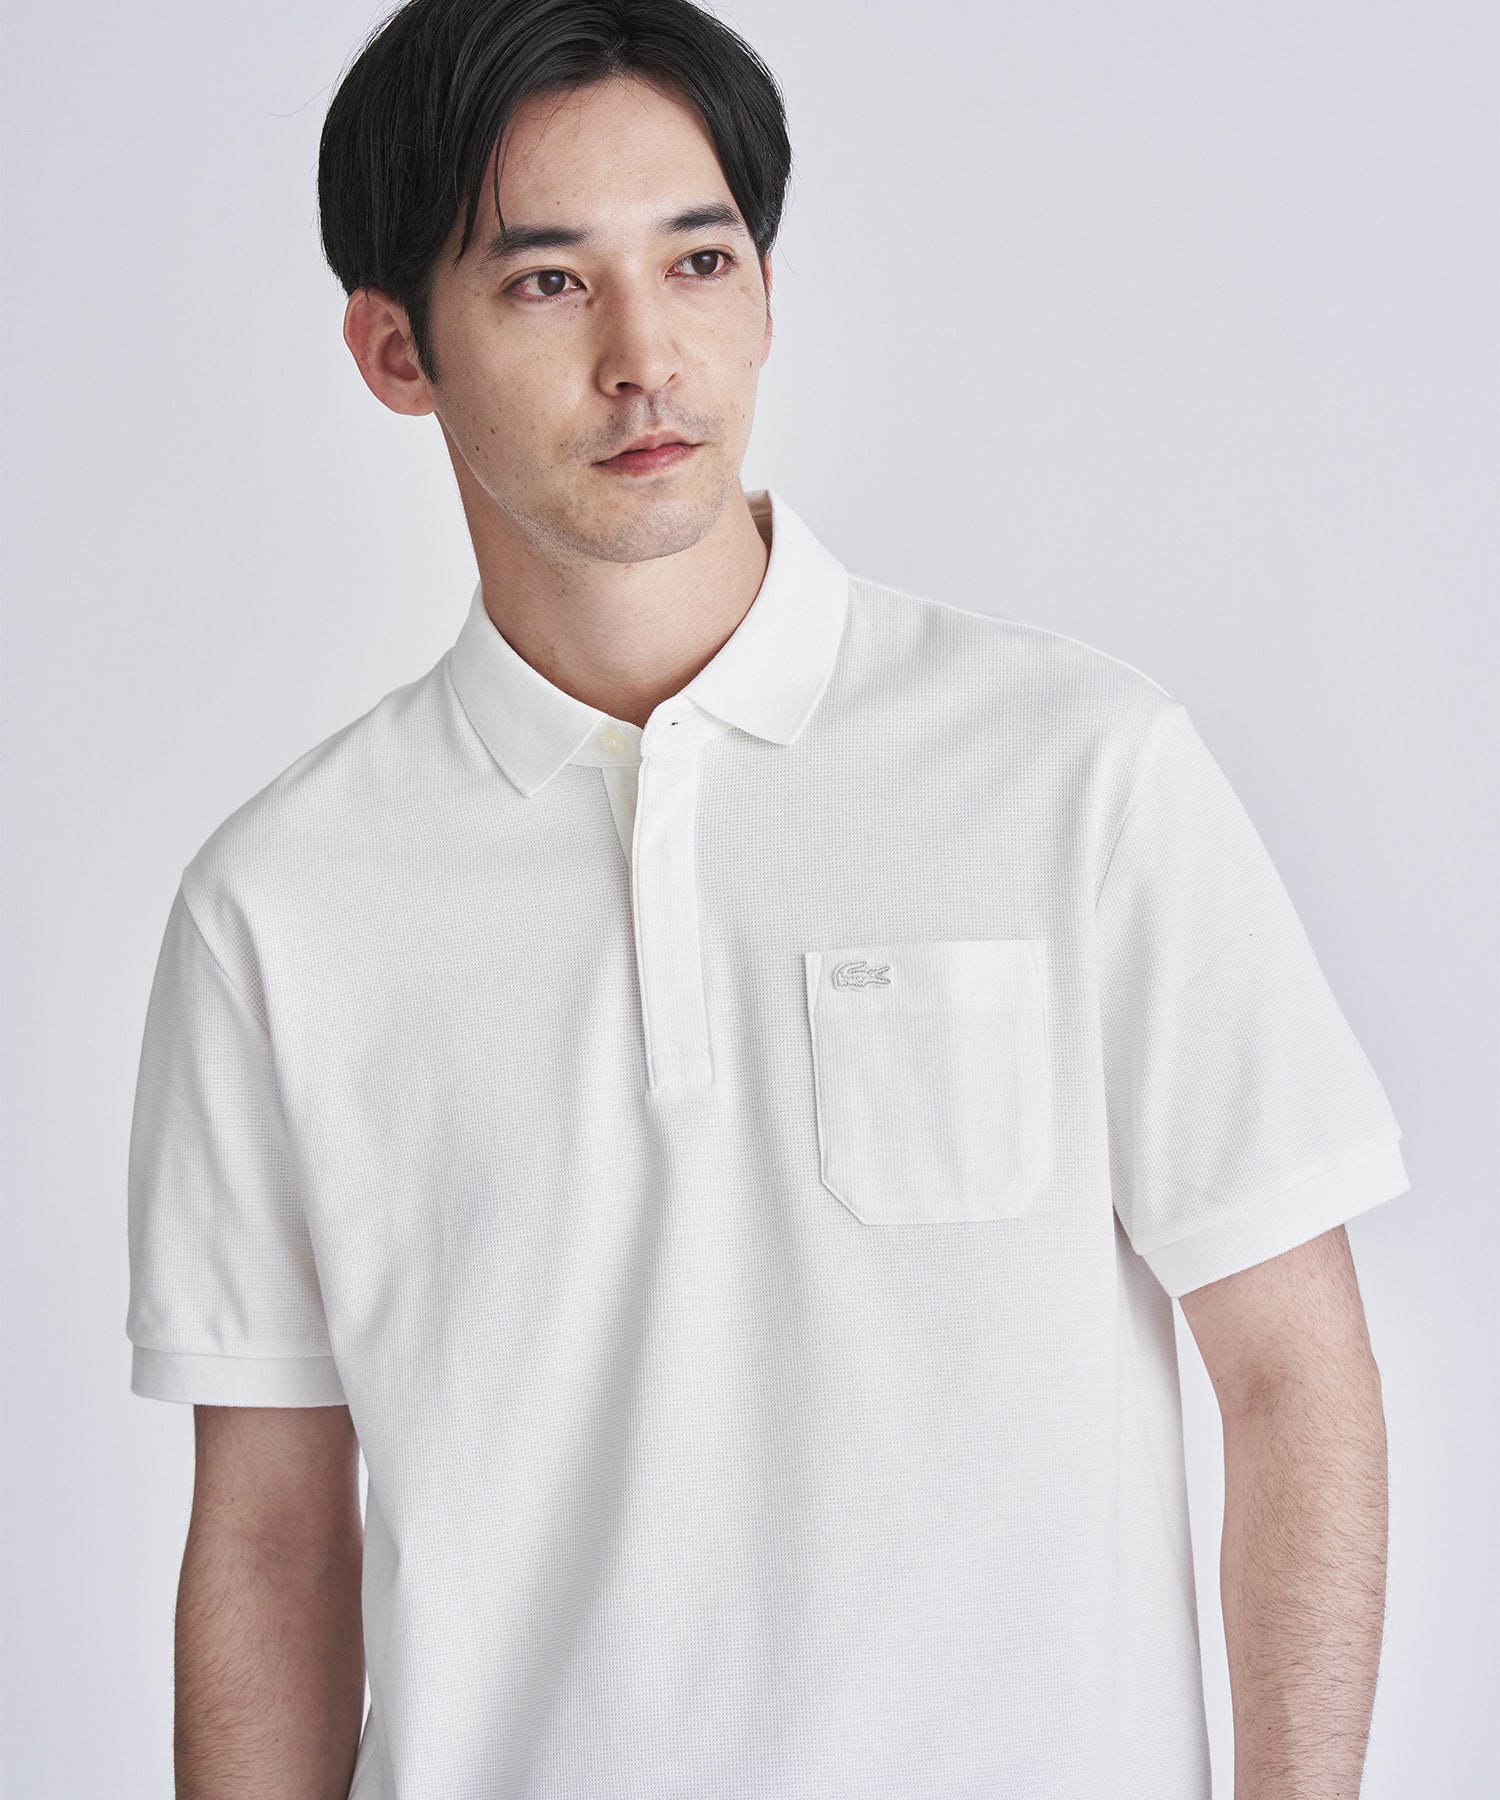 LACOSTE / ポケットポロシャツ《ESTNATION EXCLUSIVE》